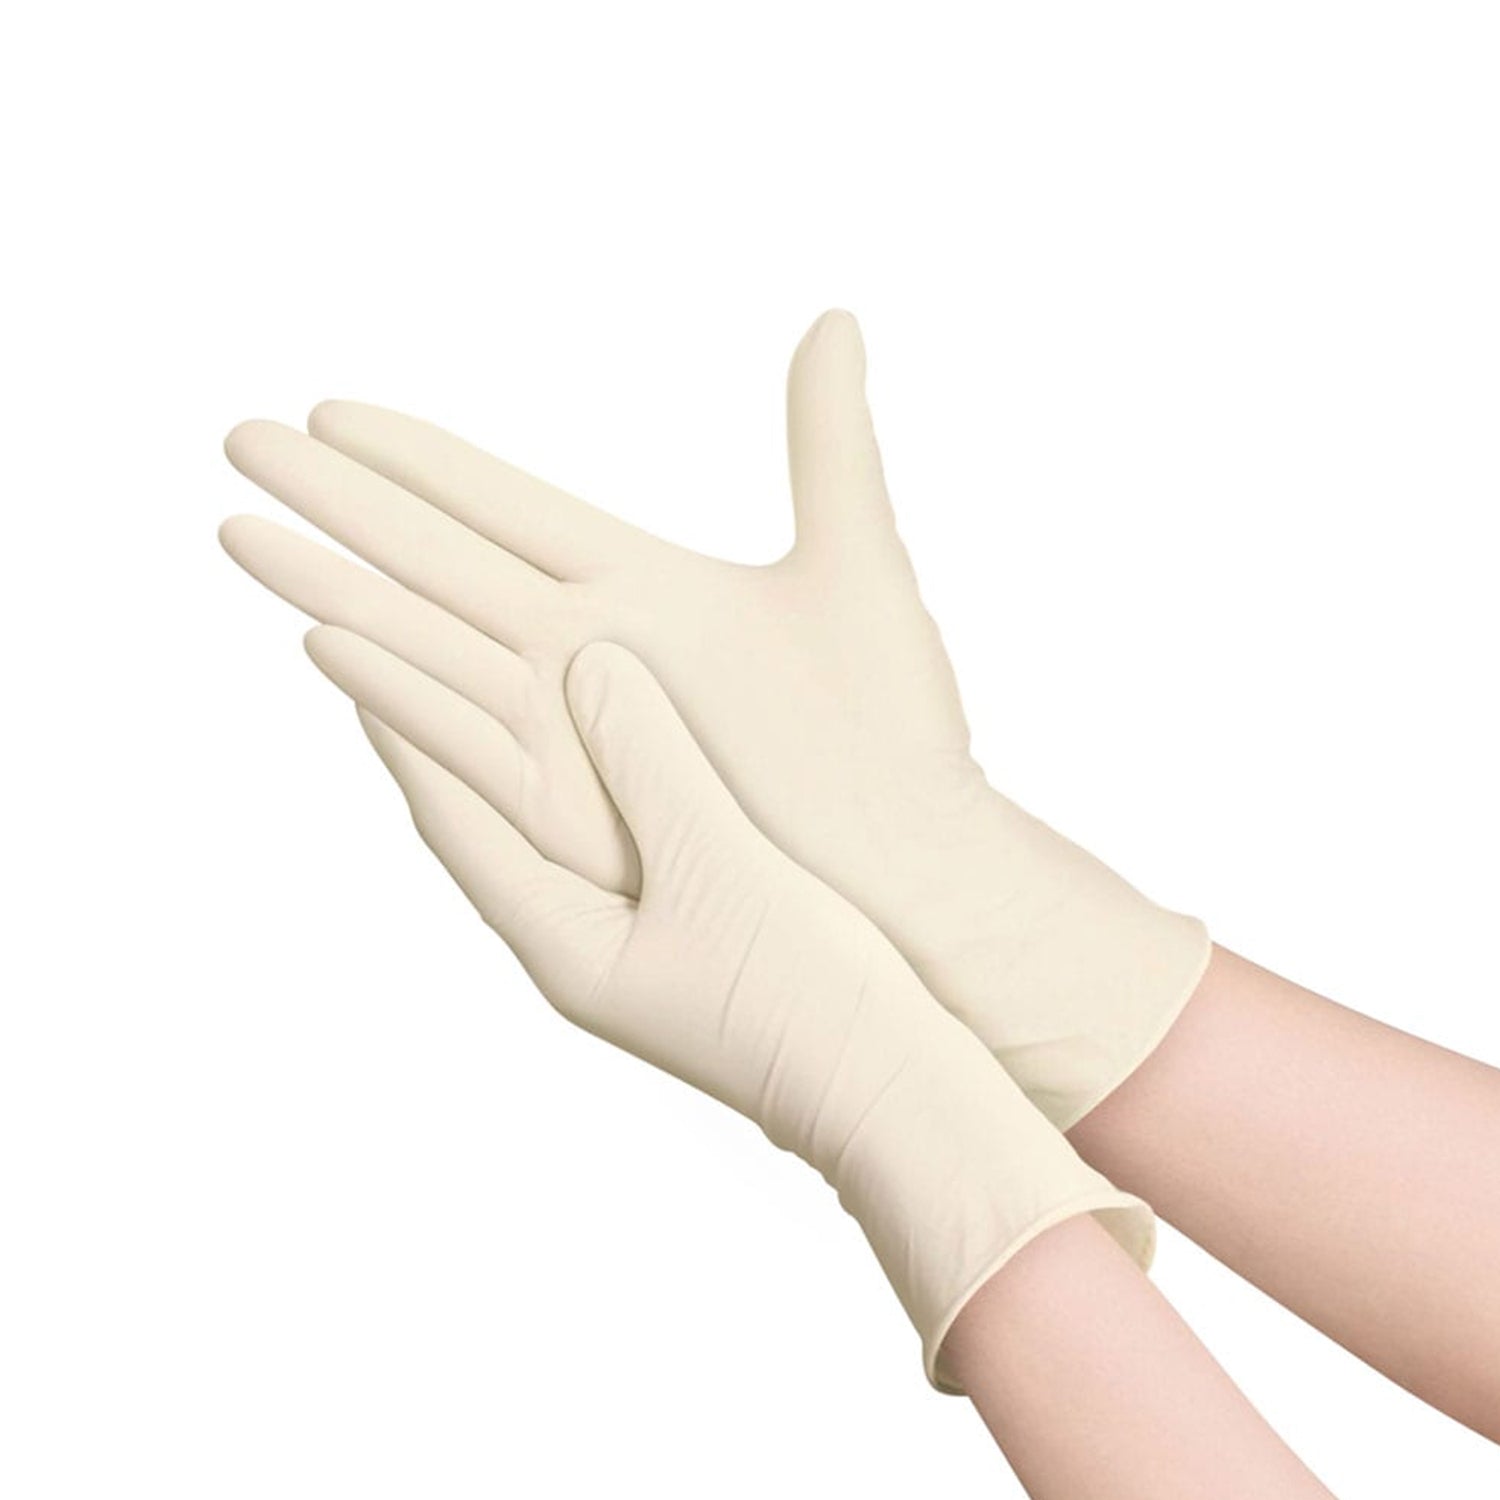 Premier Latex Sterile Powder Free Gloves | Small | Pack of 50 pairs (5)